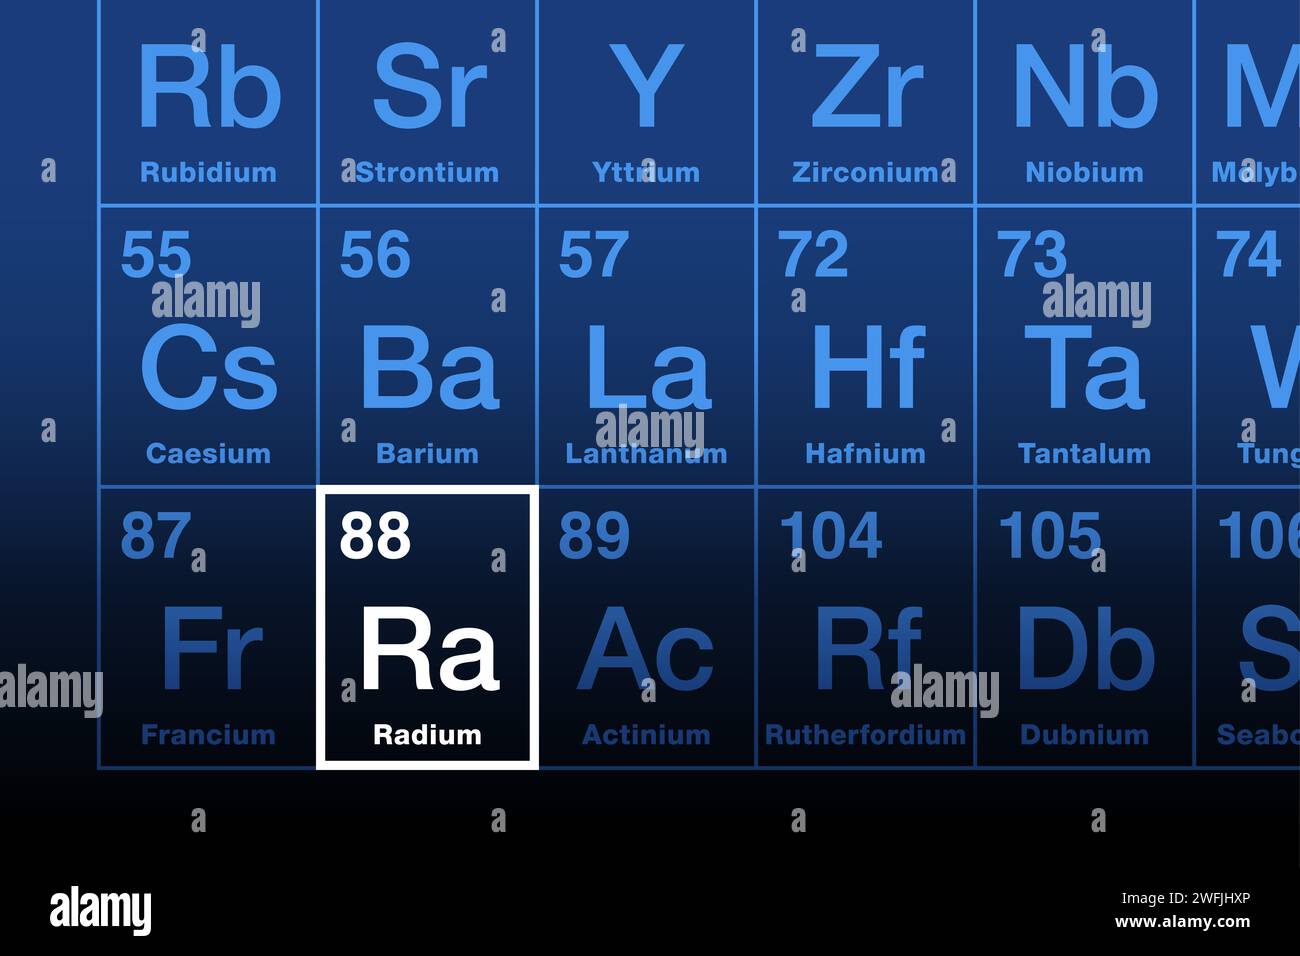 Radium element on the periodic table. Radioactive alkaline earth metal, with chemical element symbol Ra, and atomic number 88. Decays into radon gas. Stock Photo